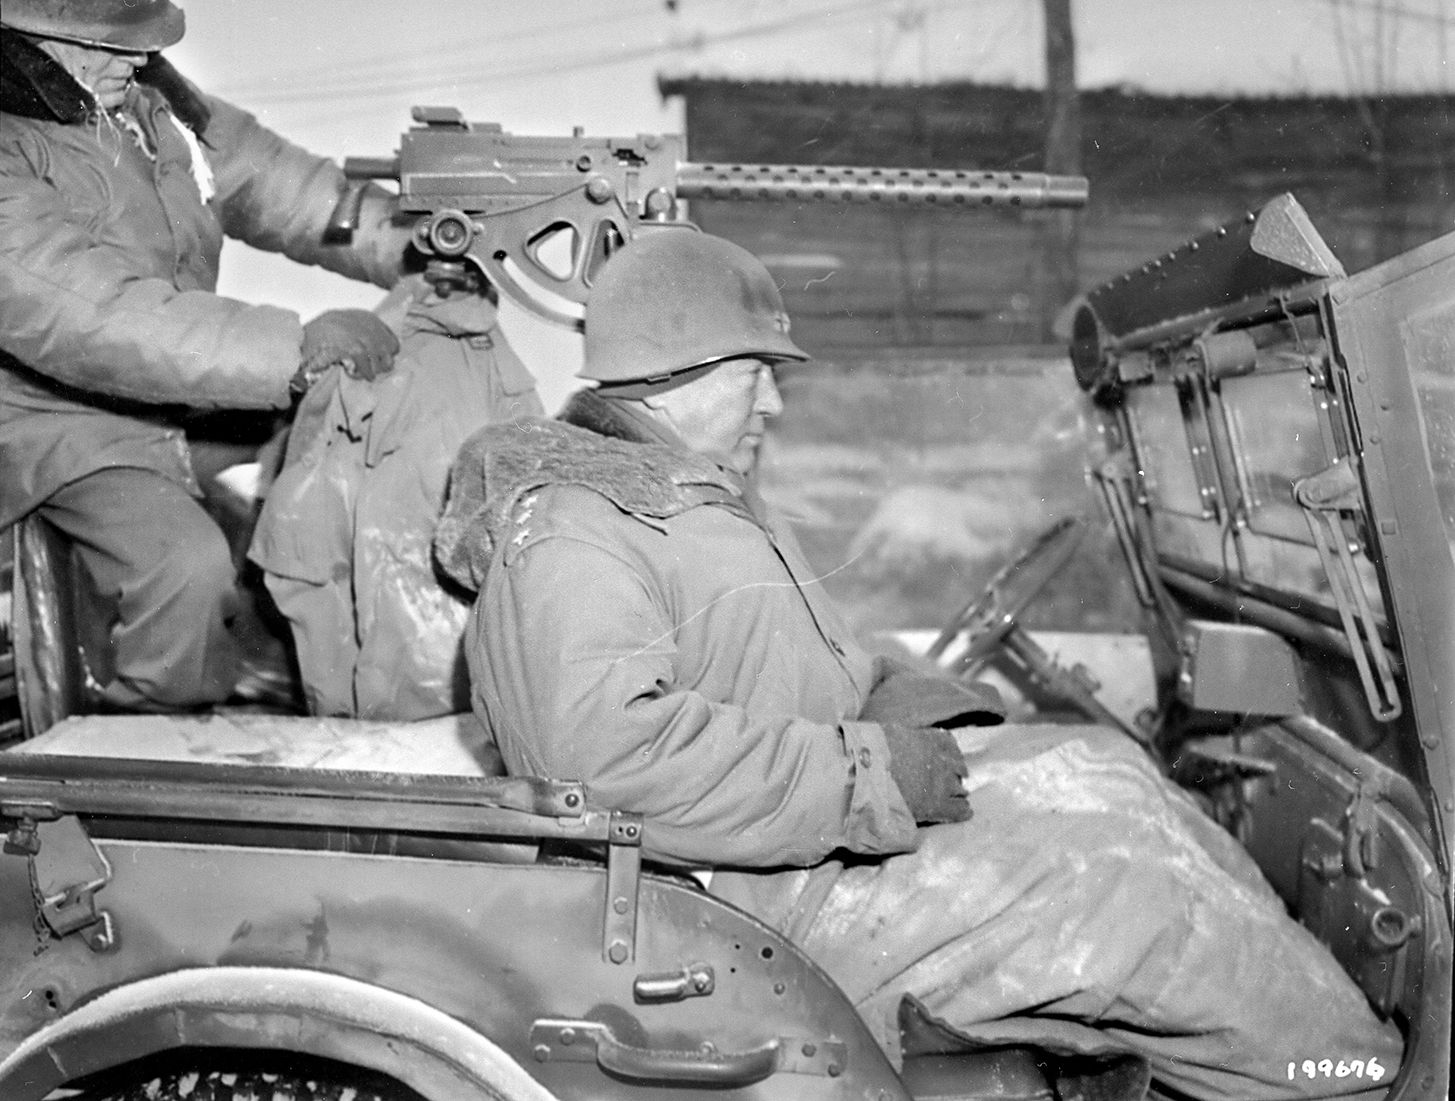 Lieutenant General George Patton rides in an open jeep on his way to visit the headquarters of the 87th Infantry Division, one of his Third Army units that he ordered to attack the Germans during the Bulge.